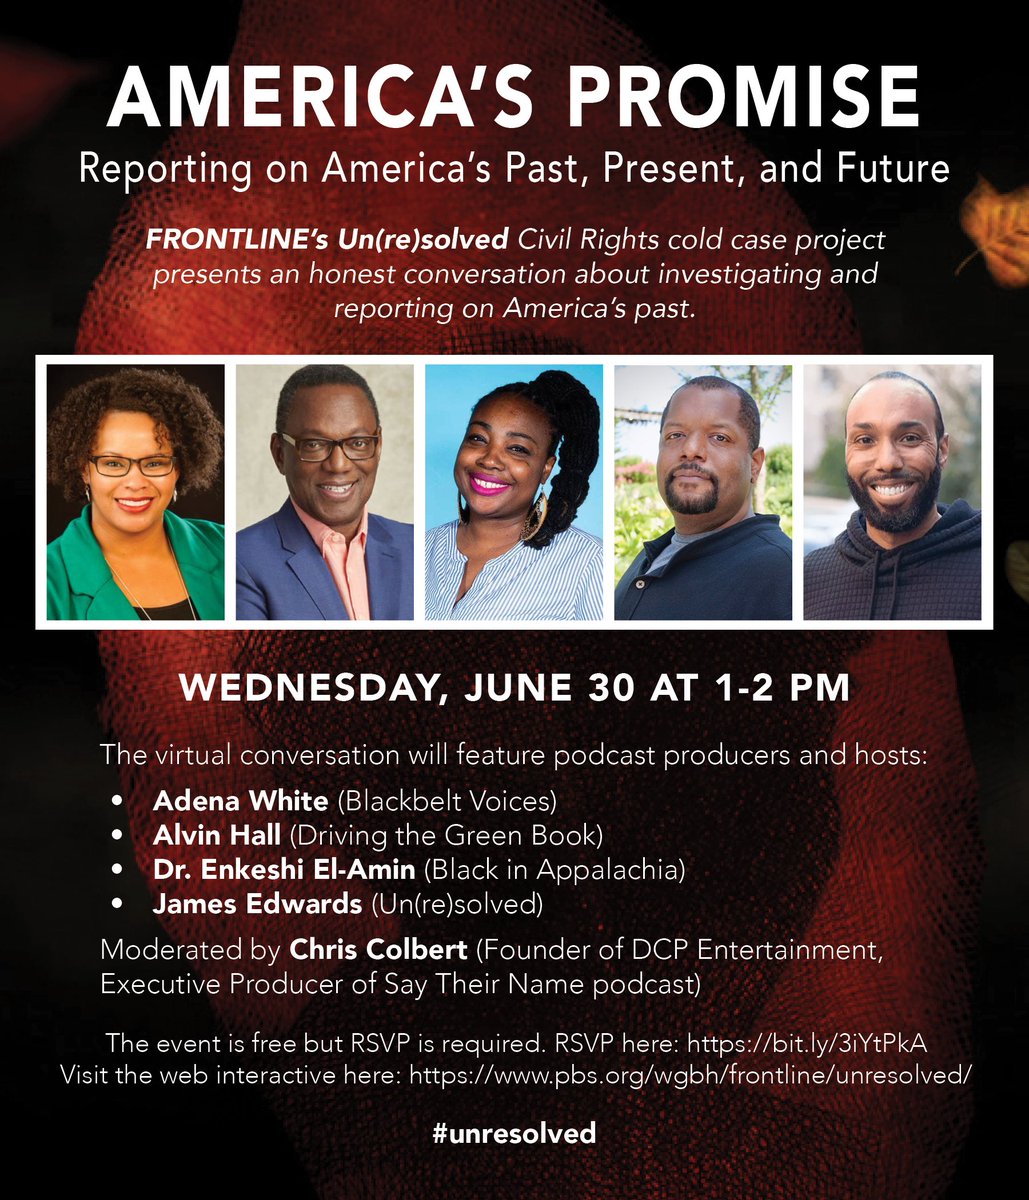 Tune in to an honest conversation about America's past featuring podcast producers and hosts, including our own @alvin_d_hall! This @frontlinepbs Civil Rights project will take place June 30. Register here: bit.ly/2Skhn3K #Unresolved